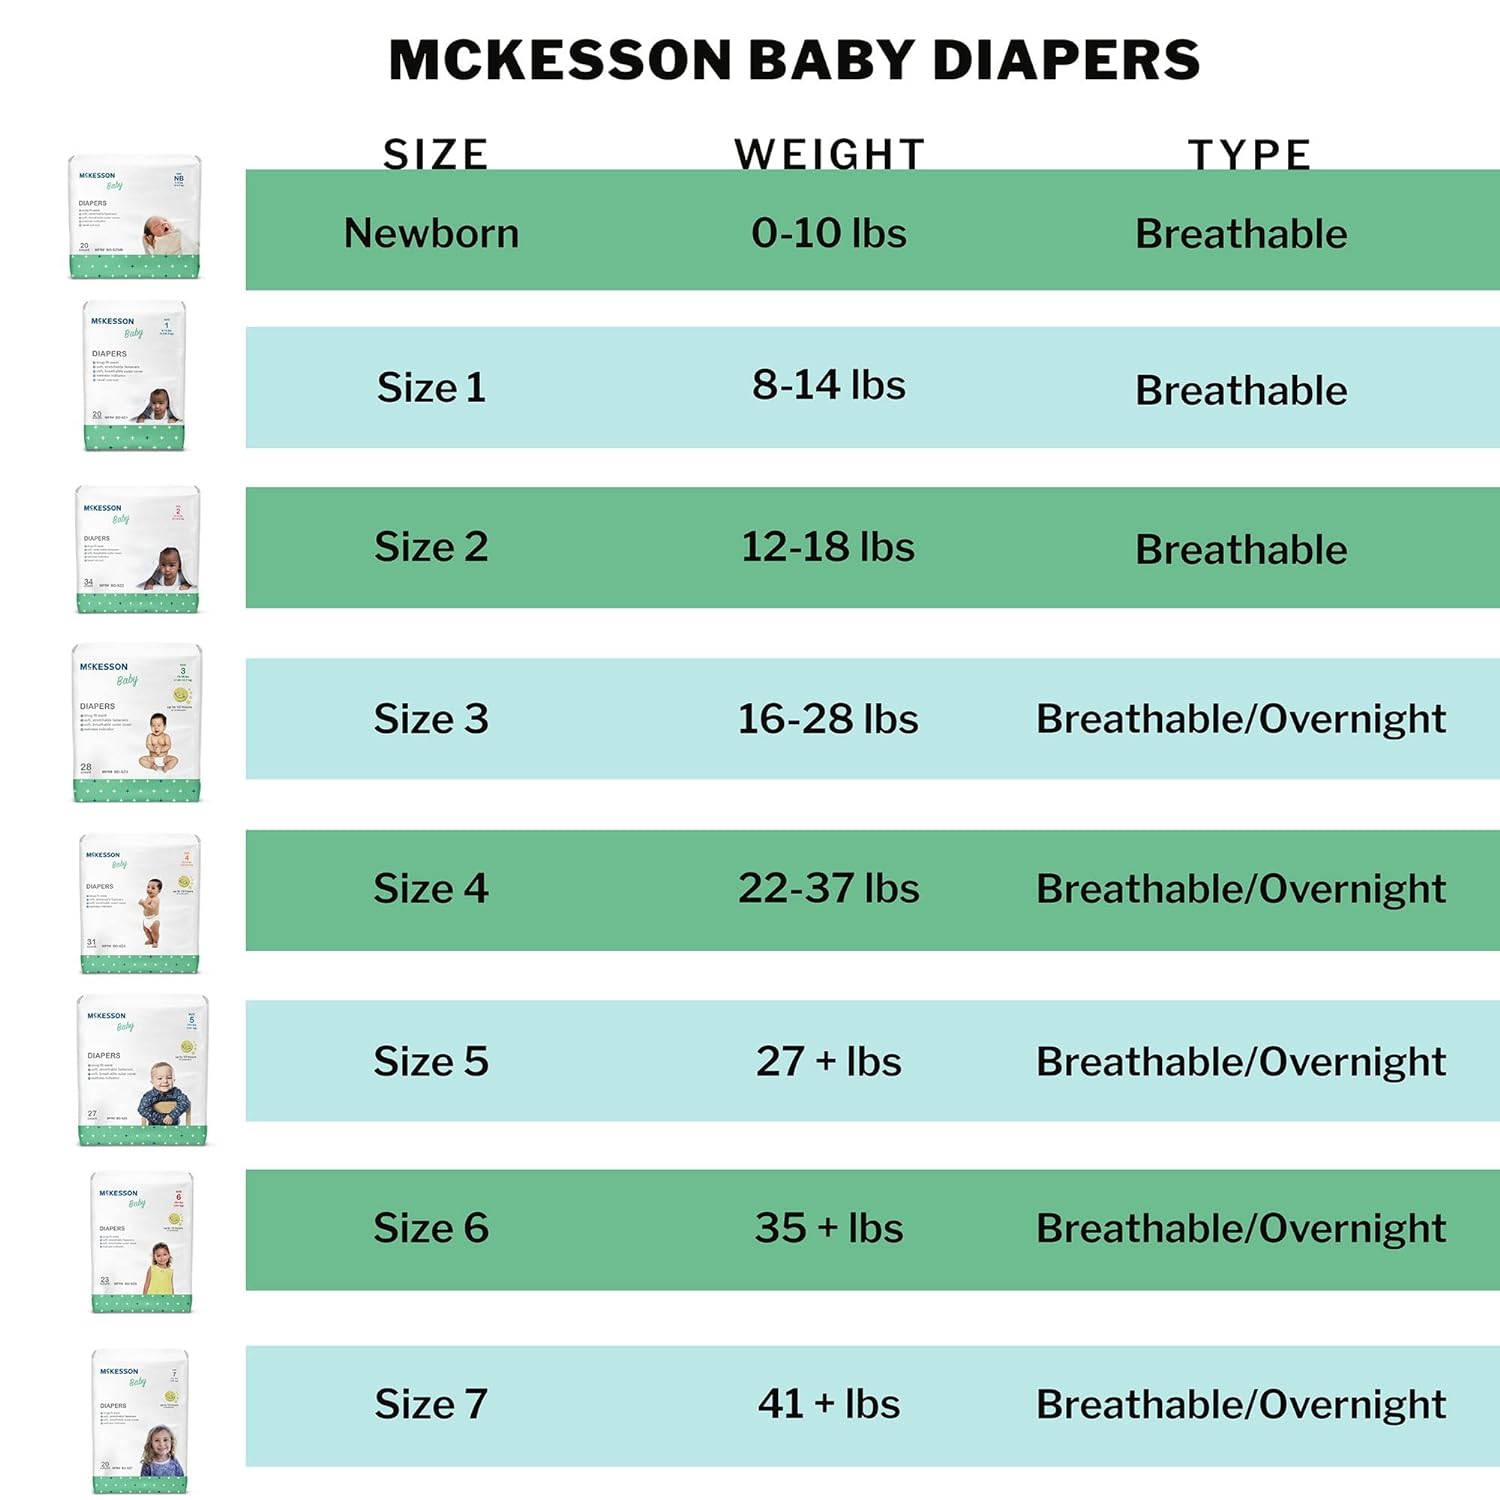 McKesson Baby Diapers, Size 4 (22 lbs to 37 lbs), 31 Count, 1 Pack